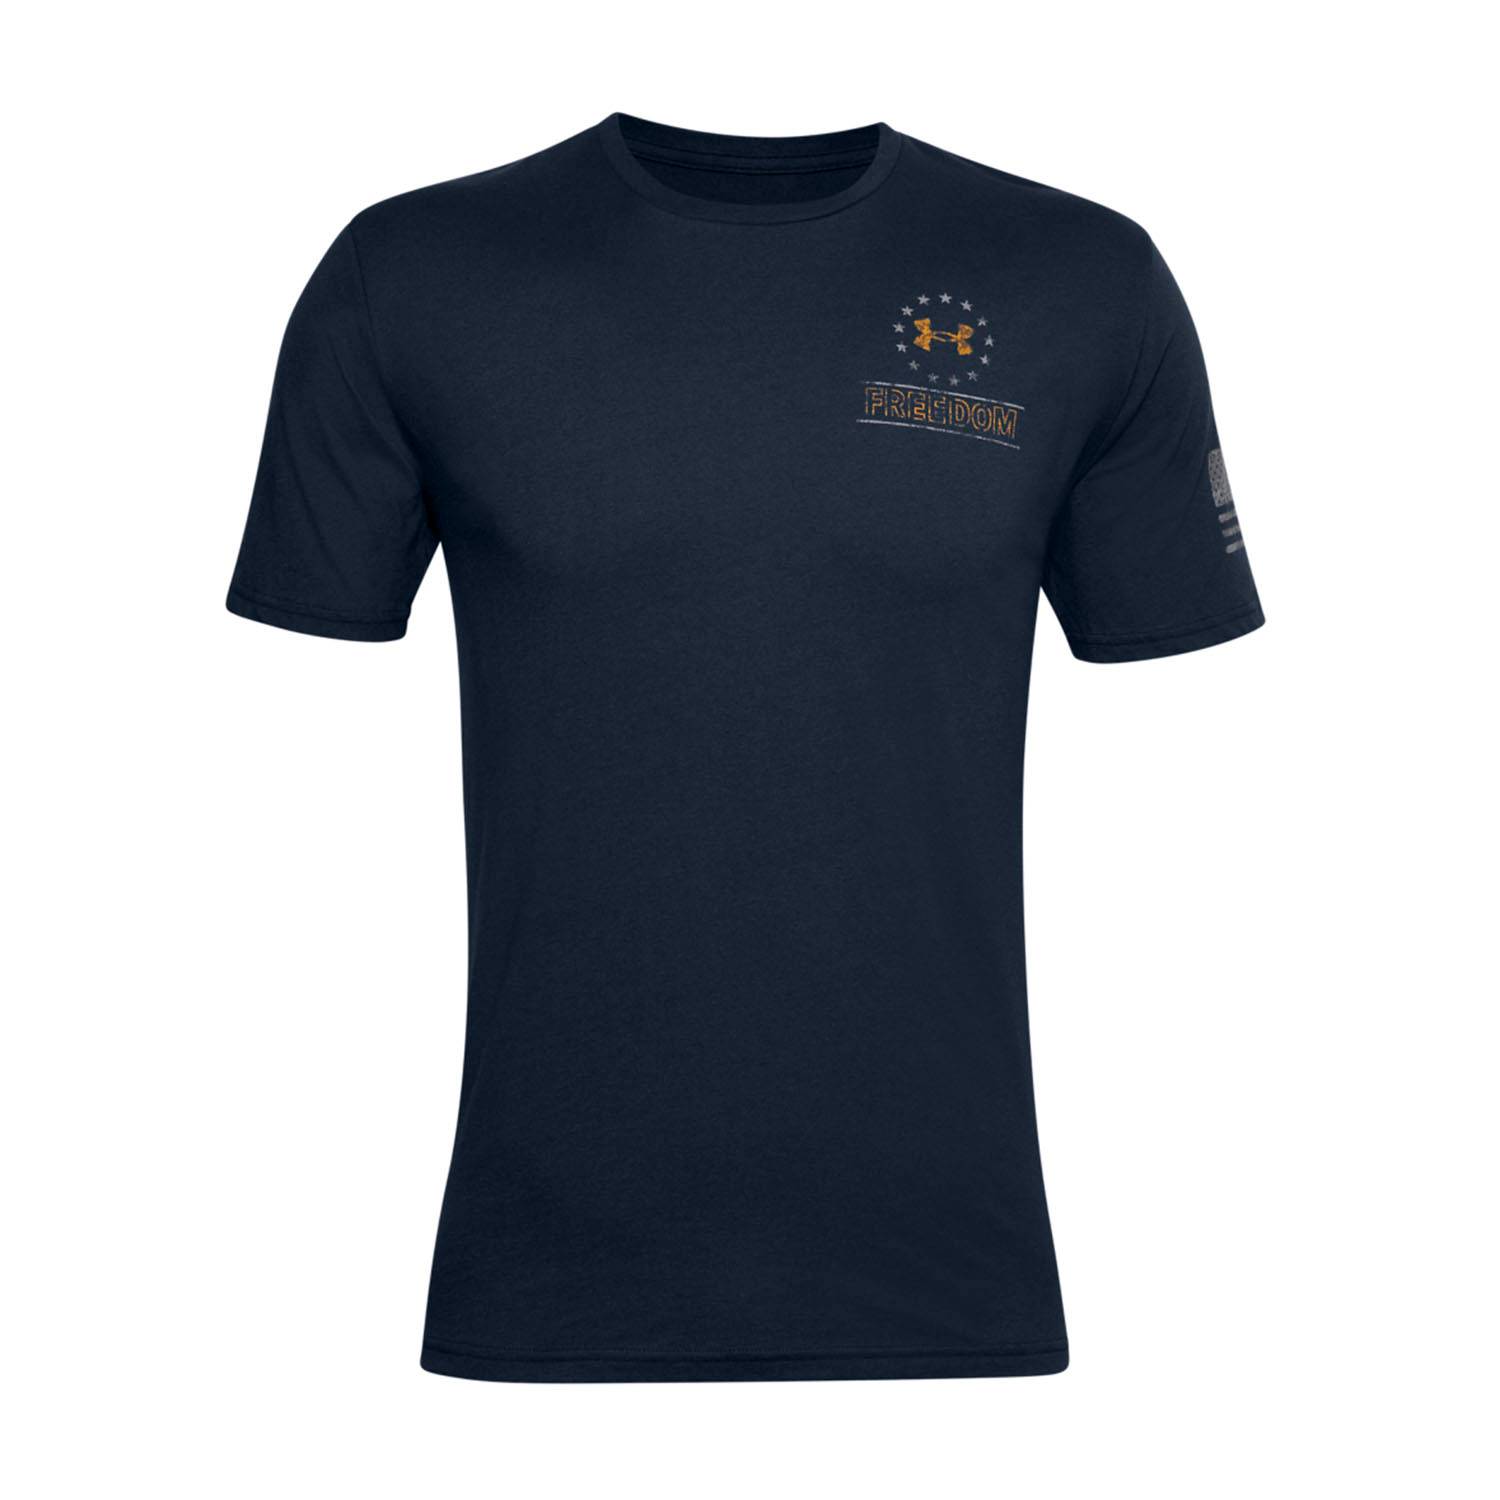 Under Armour Freedom by Sea T-Shirt